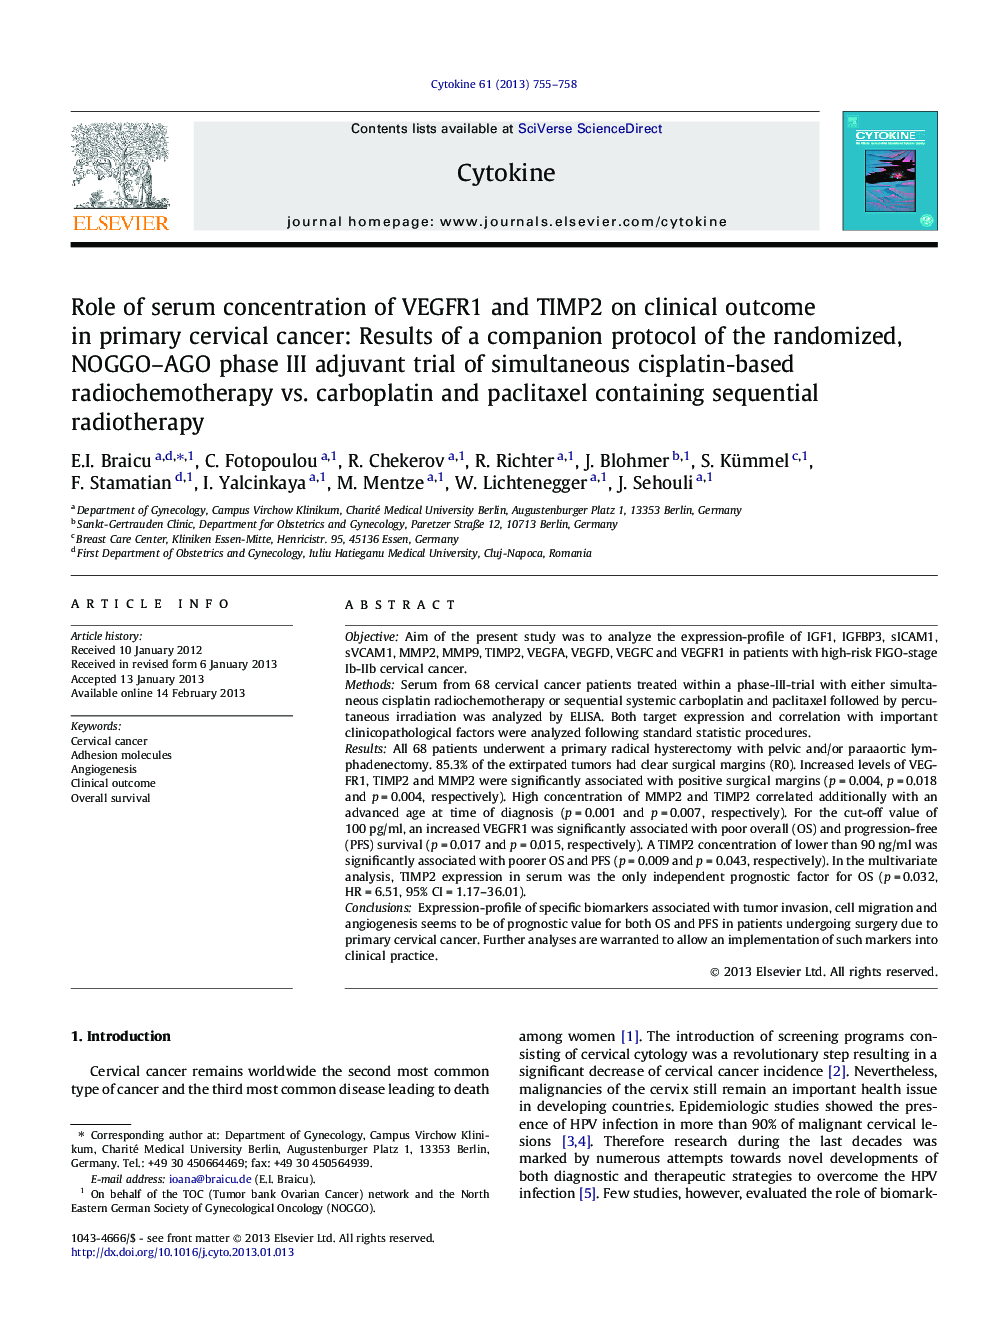 Role of serum concentration of VEGFR1 and TIMP2 on clinical outcome in primary cervical cancer: Results of a companion protocol of the randomized, NOGGO-AGO phase III adjuvant trial of simultaneous cisplatin-based radiochemotherapy vs. carboplatin and pac